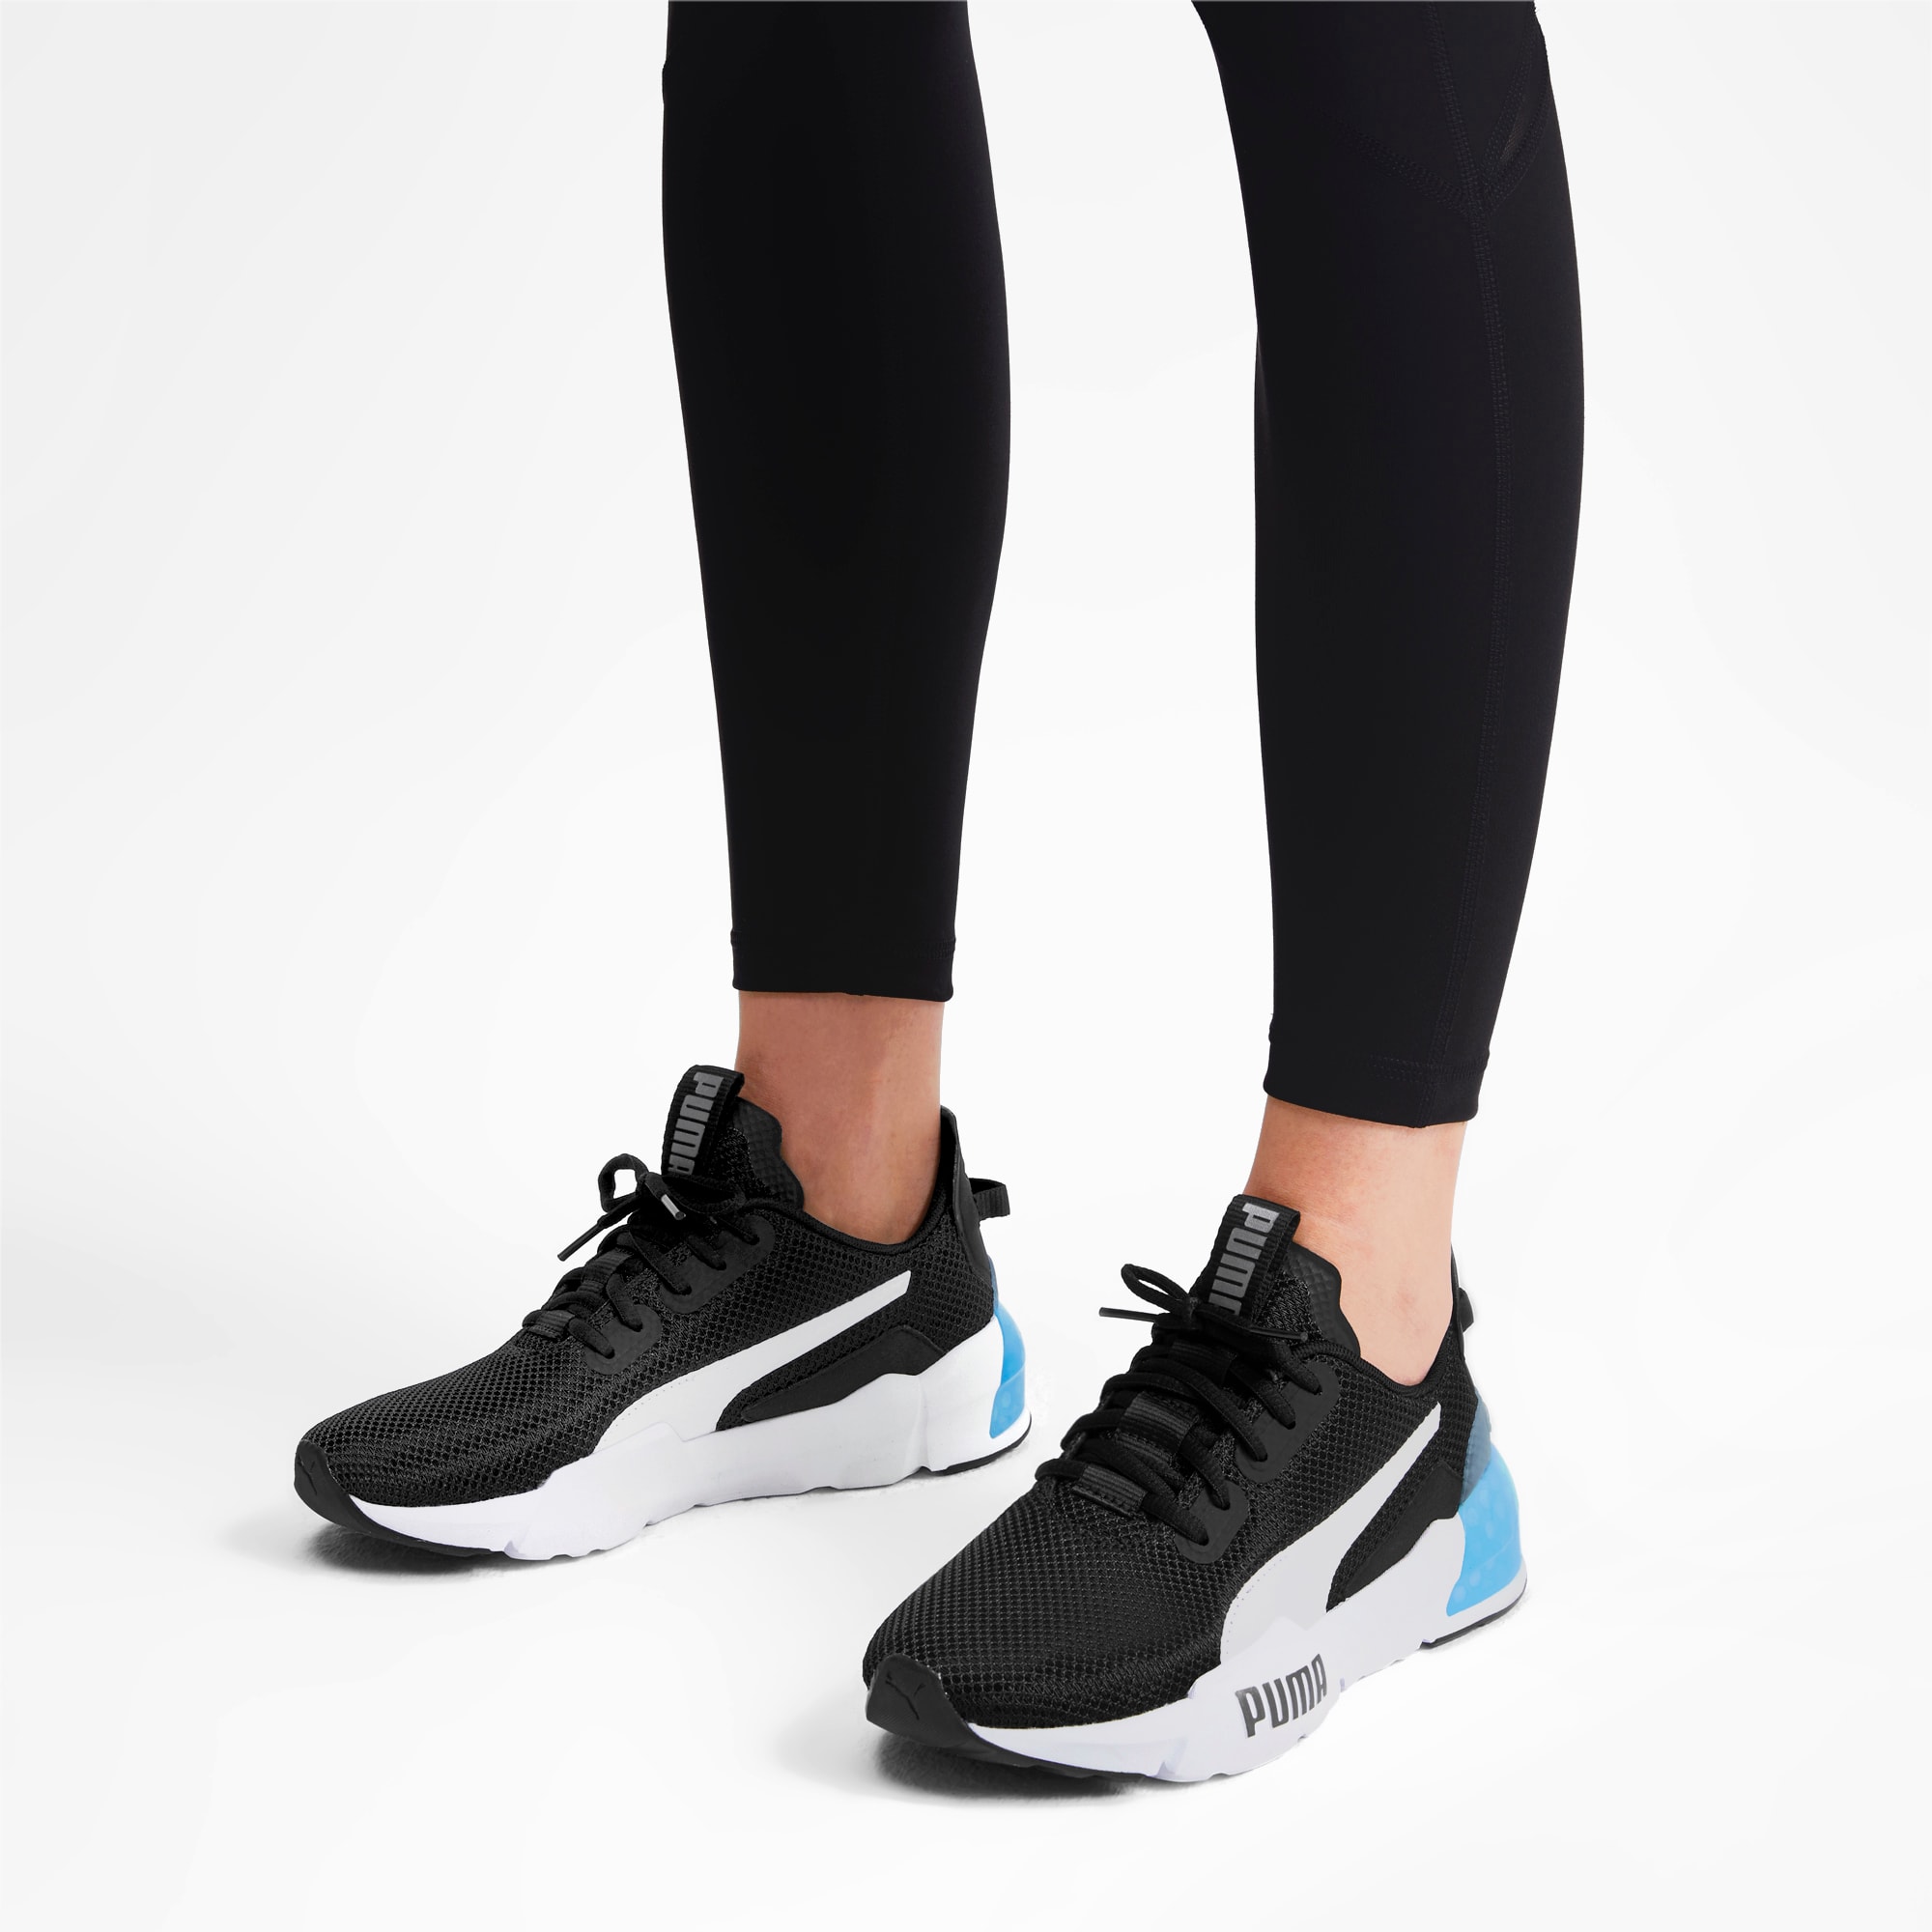 CELL Phase Women's Training Shoes | PUMA US